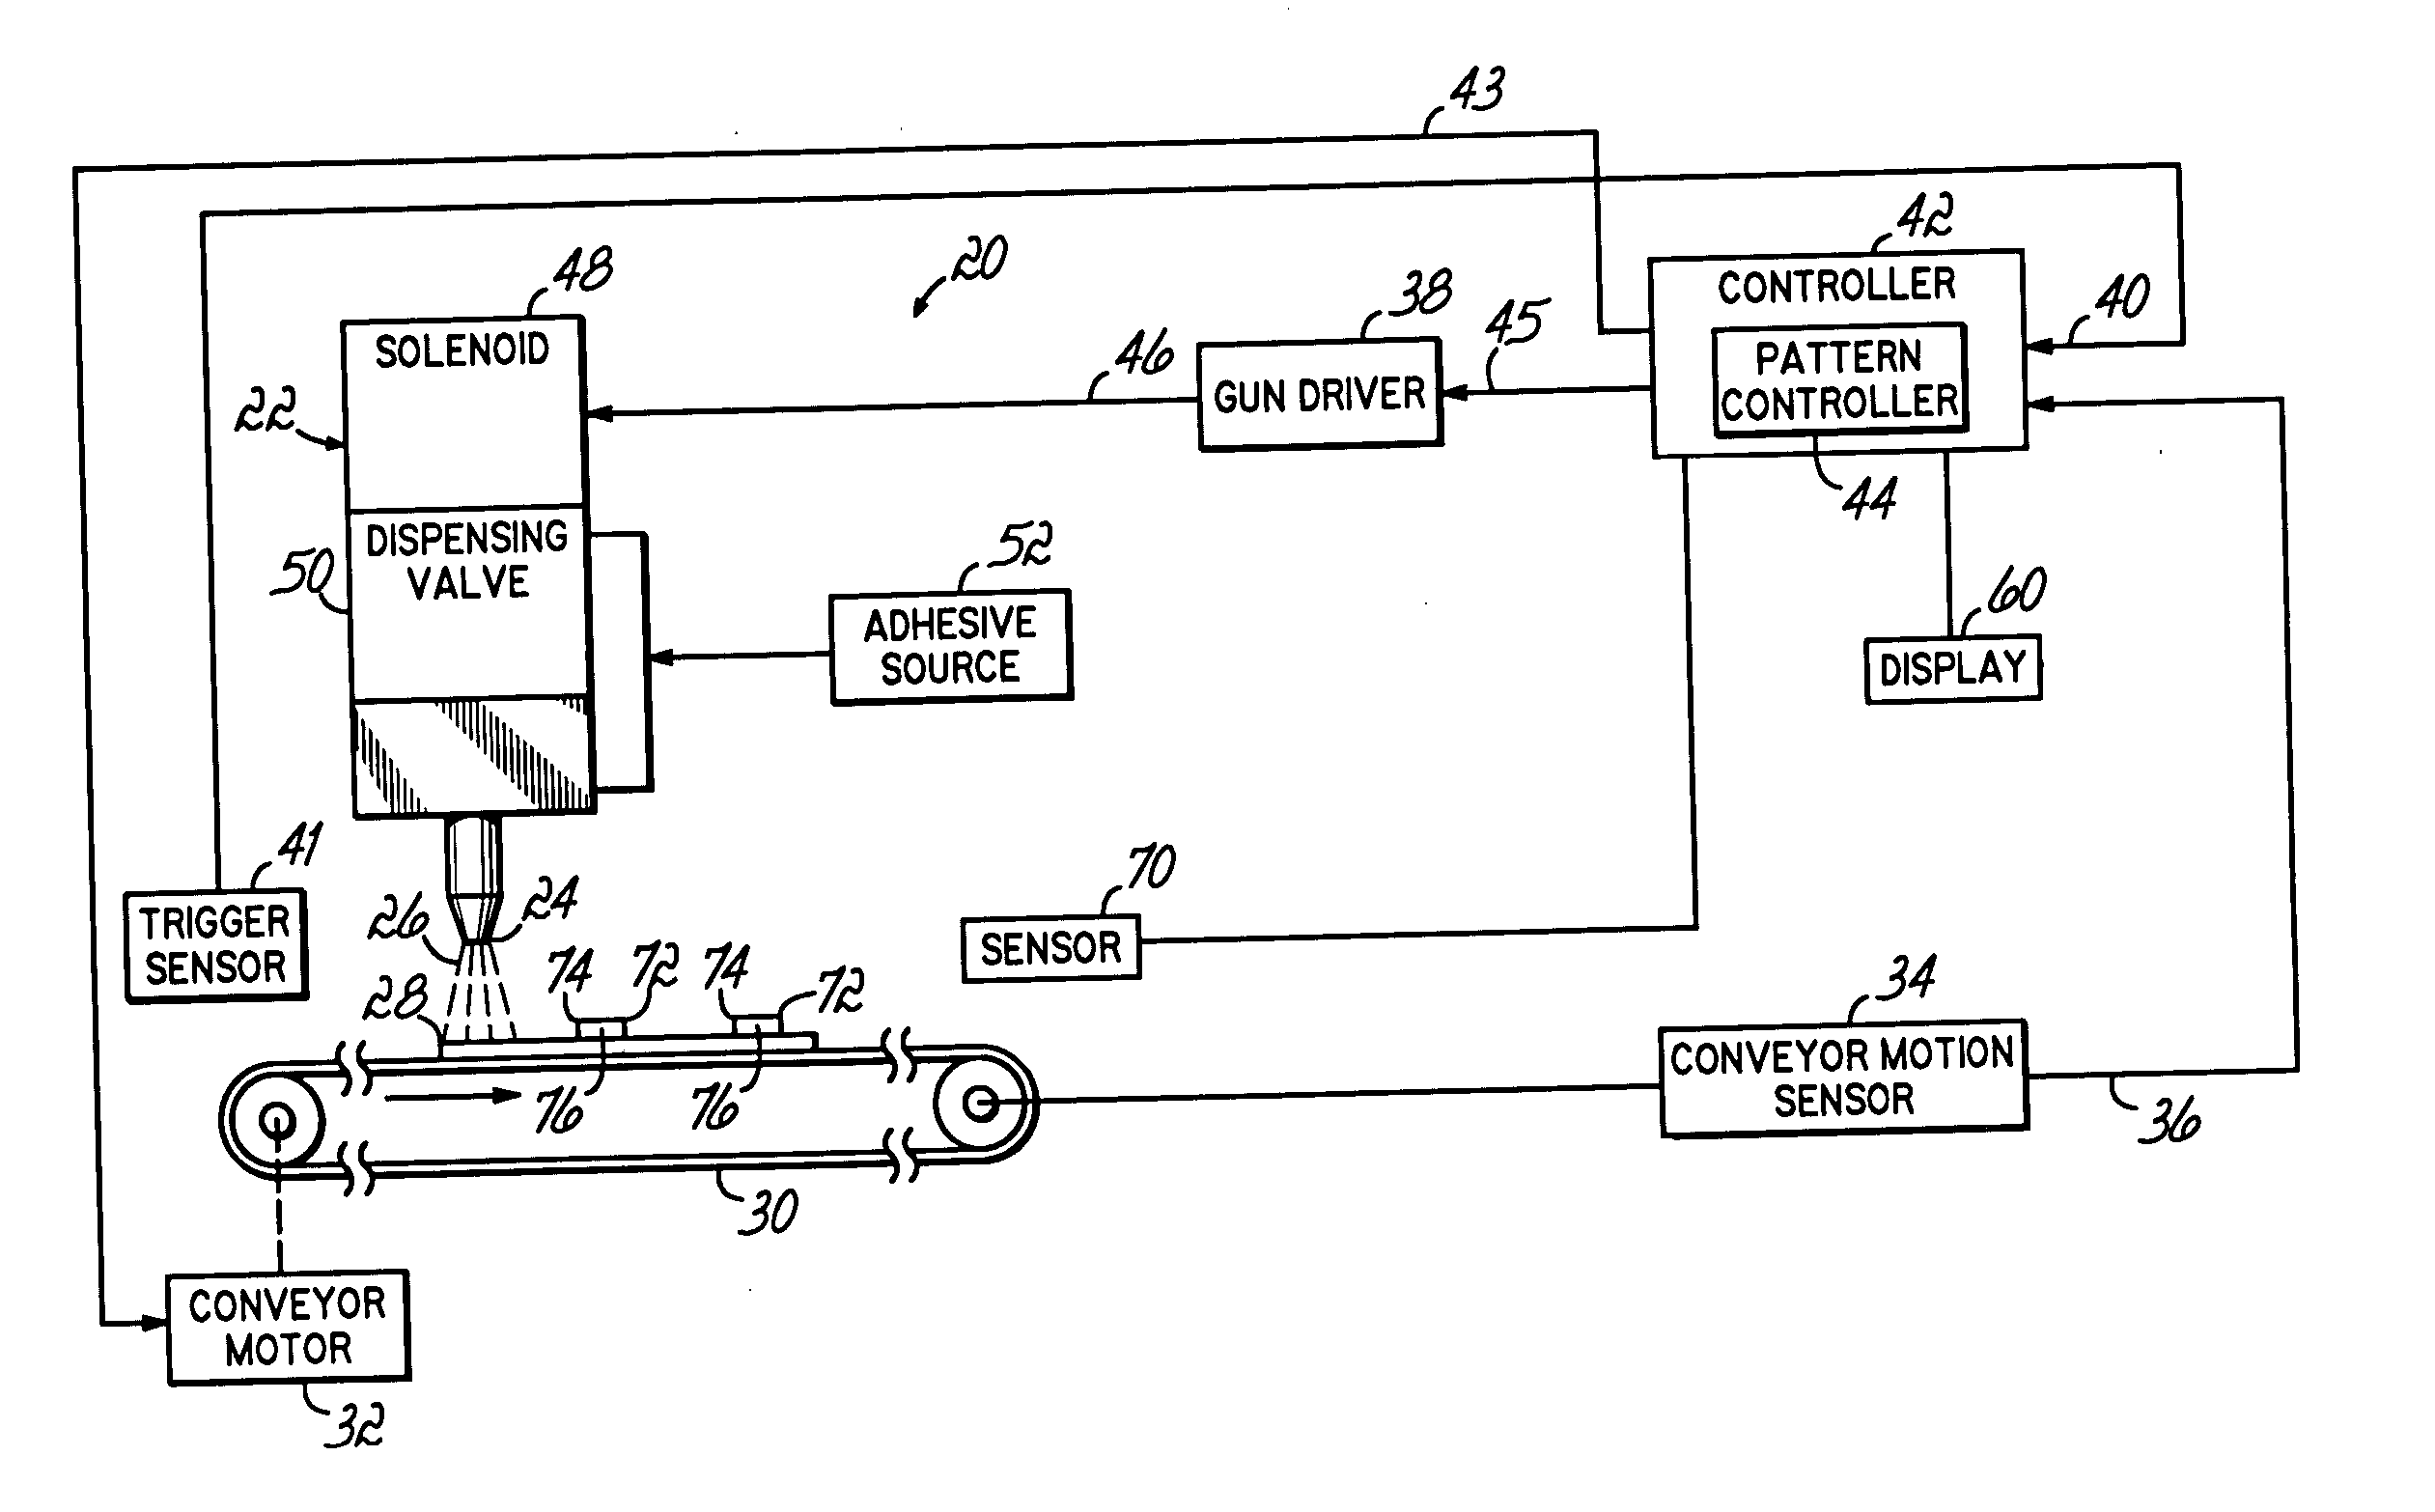 Automatic tolerance determination system for material application inspection operation